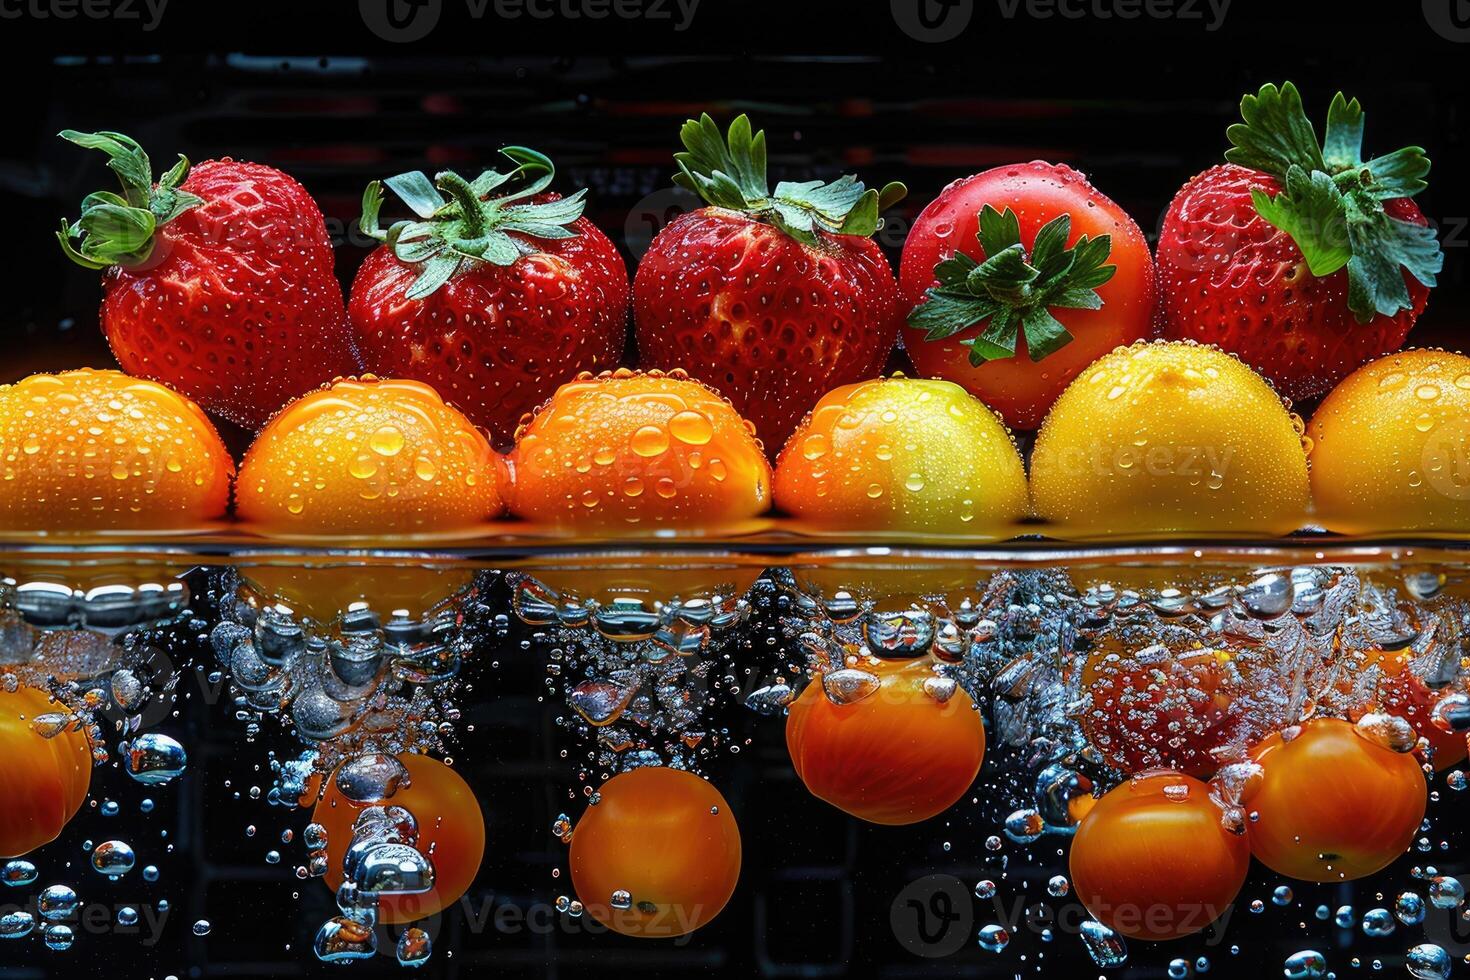 A fresh fruits or vegetables with water droplets creating a splash advertising food photography photo